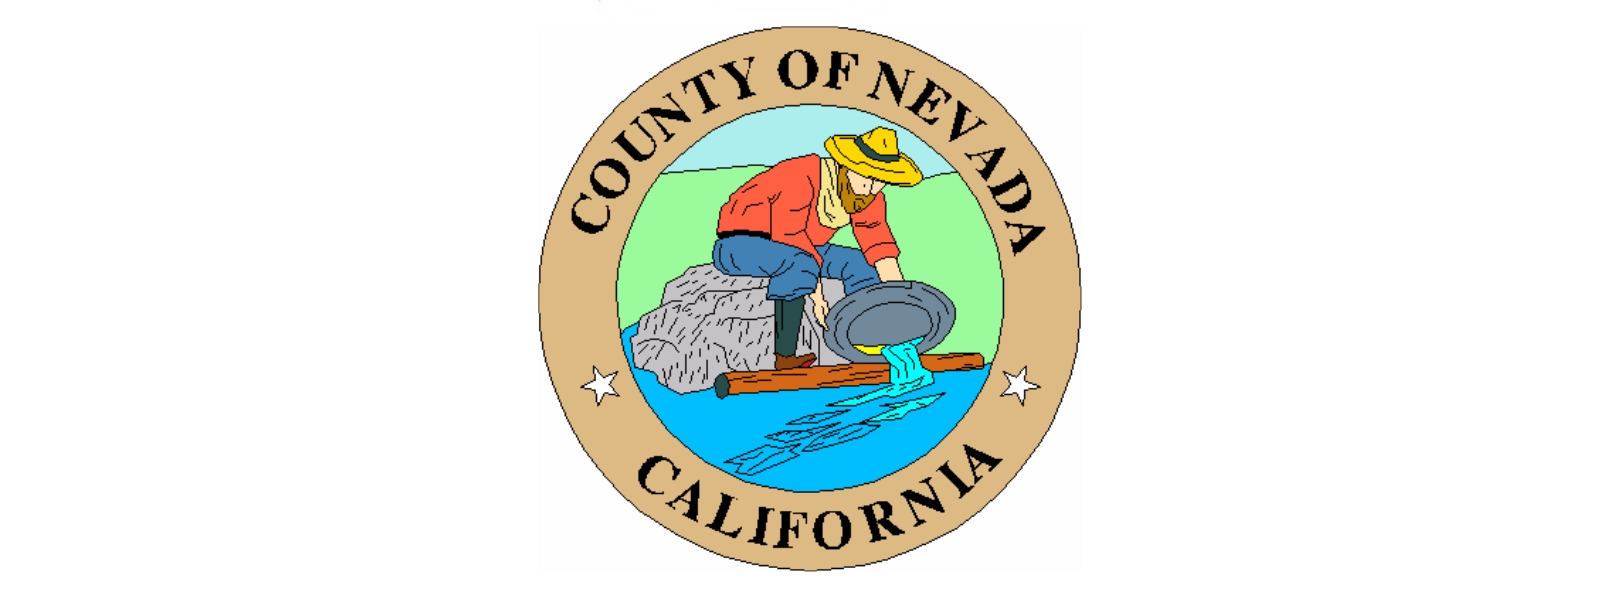 Nevada County Property Tax Due April 11 - Payment Options